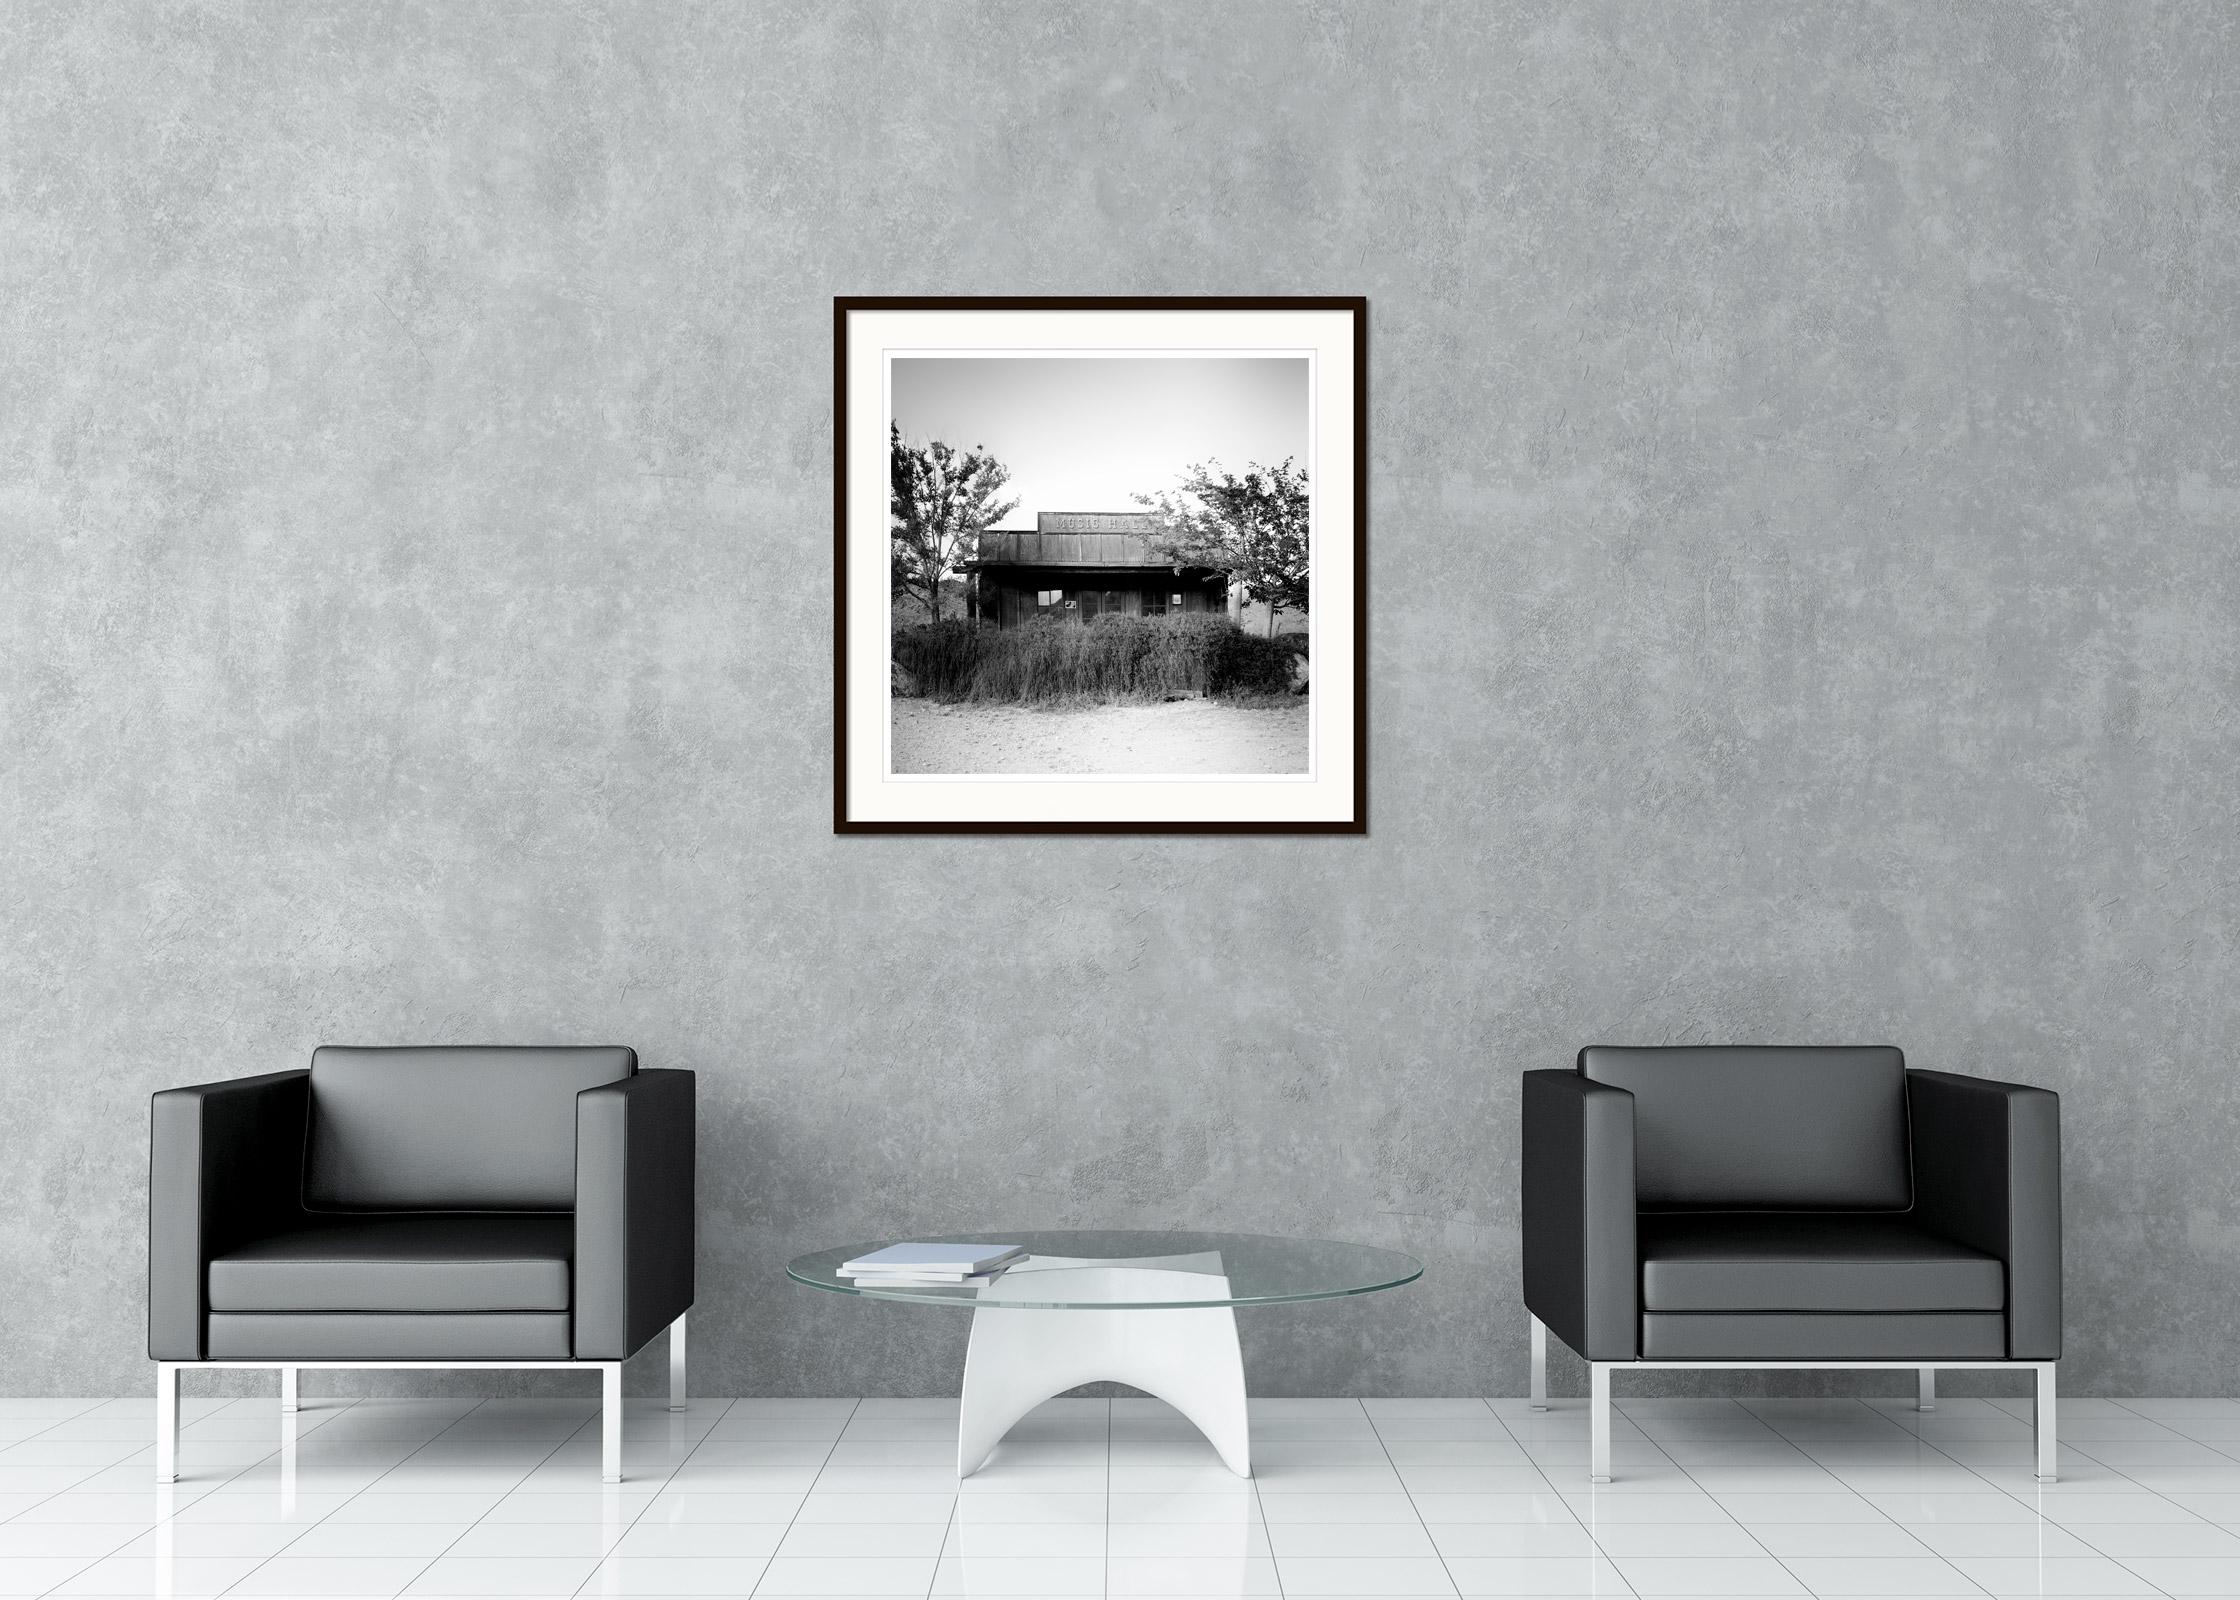 Black and White Fine Art Landscape Photography. Abandoned music hall on famous route 66 in the Arizona desert, USA. Archival pigment ink print, edition of 9. Signed, titled, dated and numbered by artist. Certificate of authenticity included. Printed